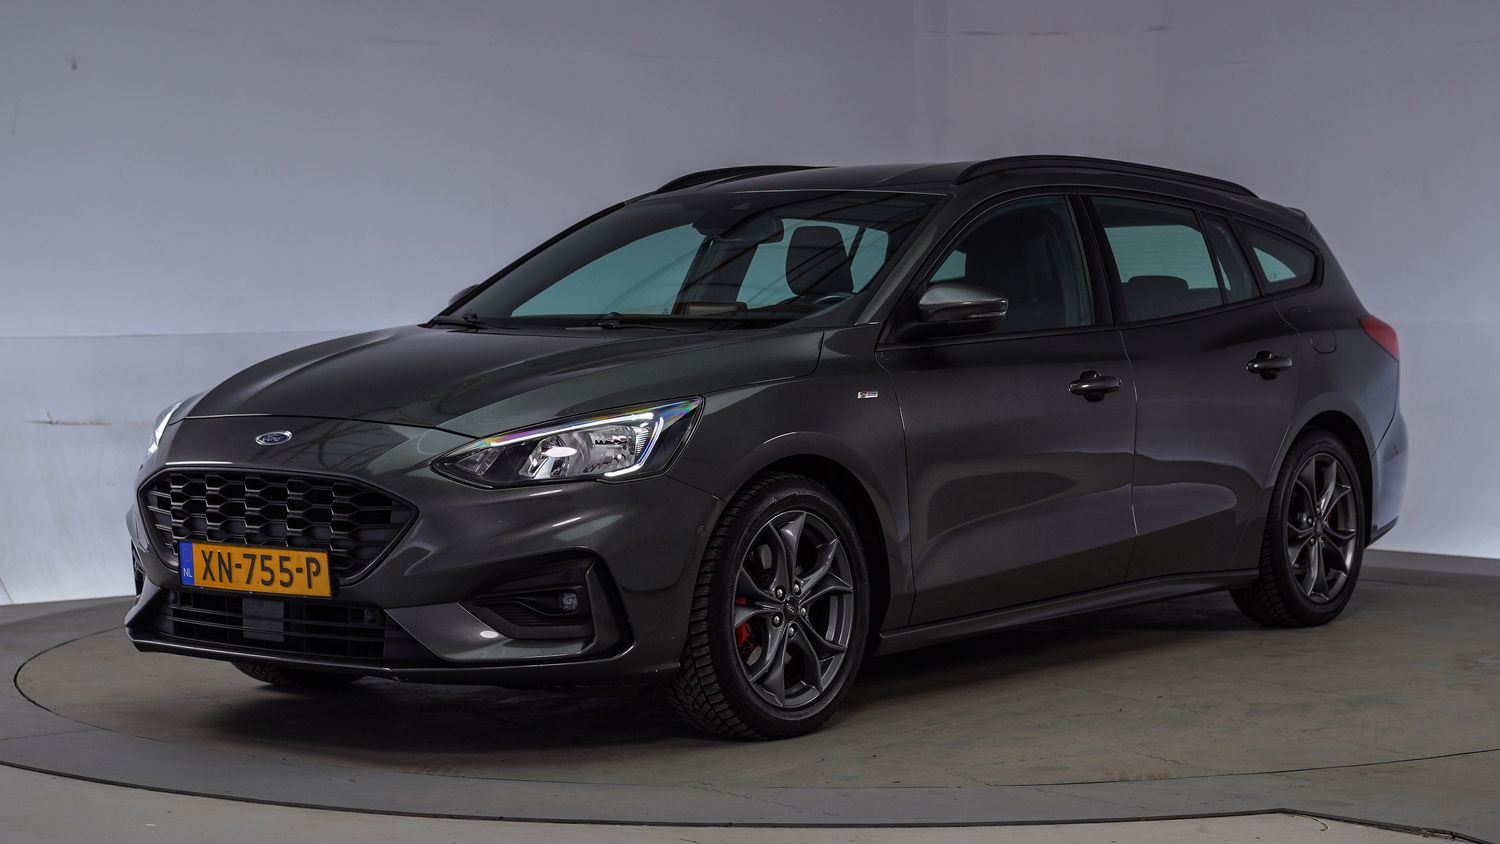 Ford Focus Station 2019 XN-755-P 1